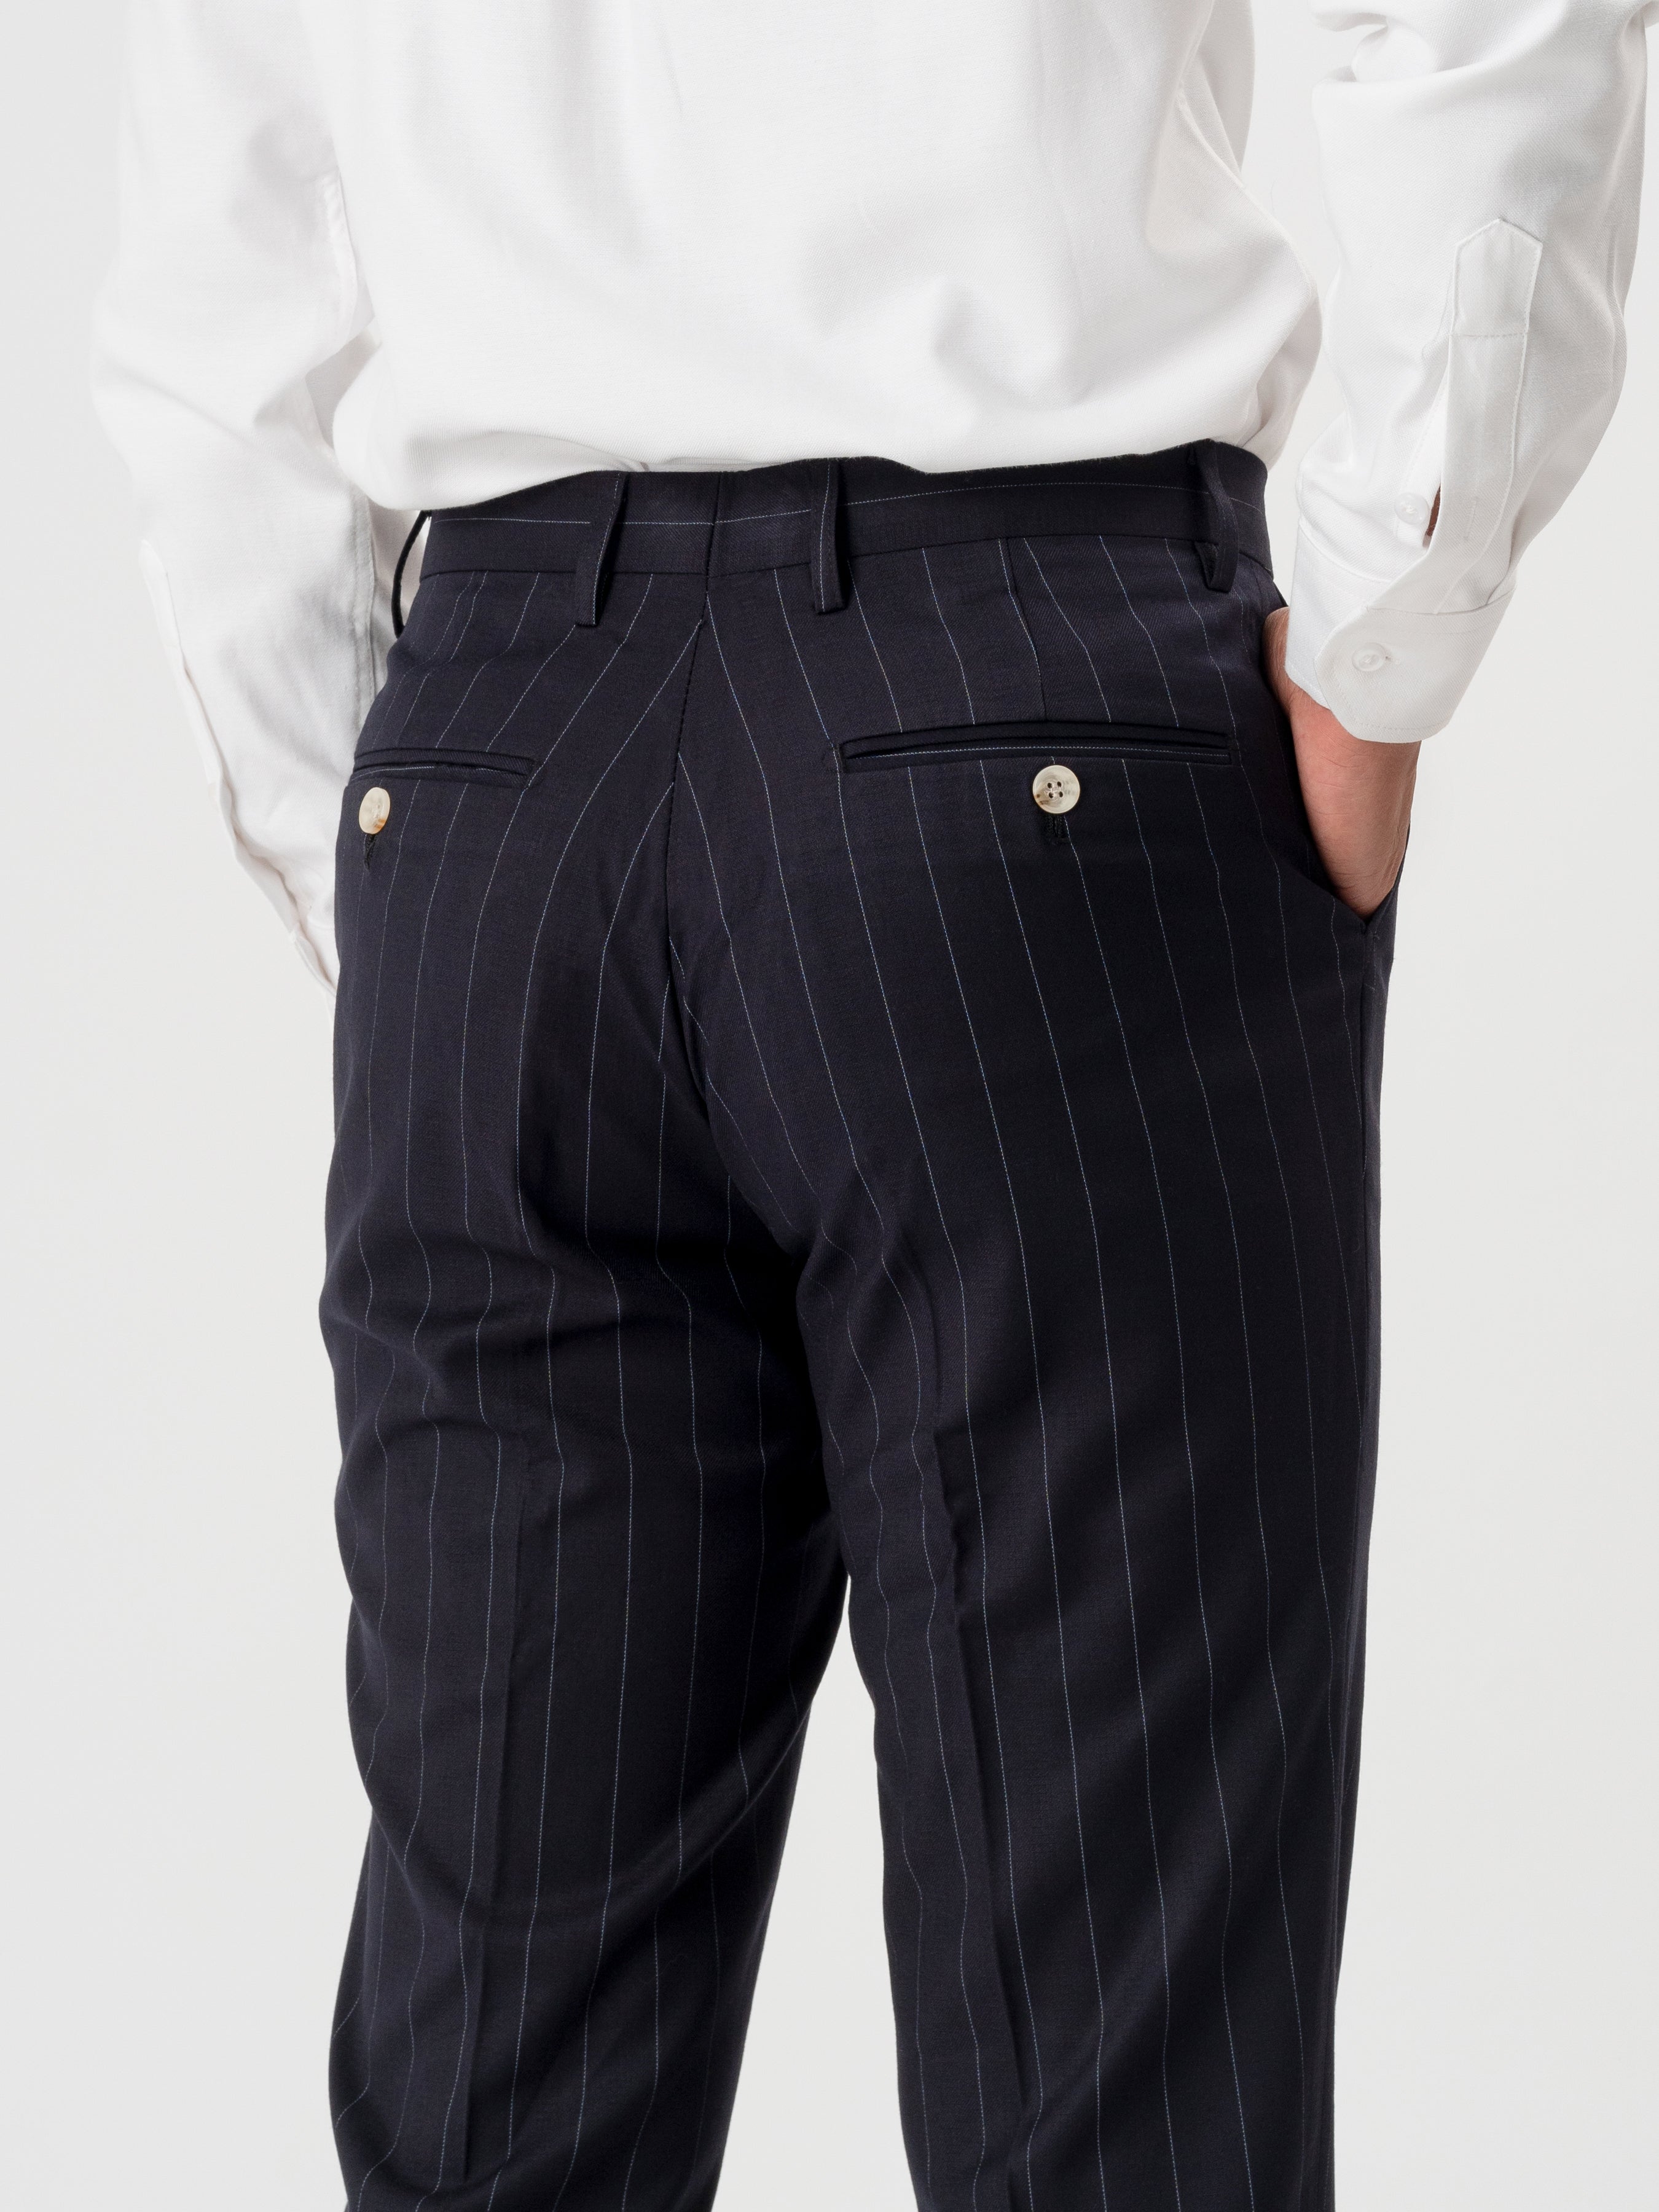 Trousers With Belt Loop - Deep Blue Stripes (Stretchable)